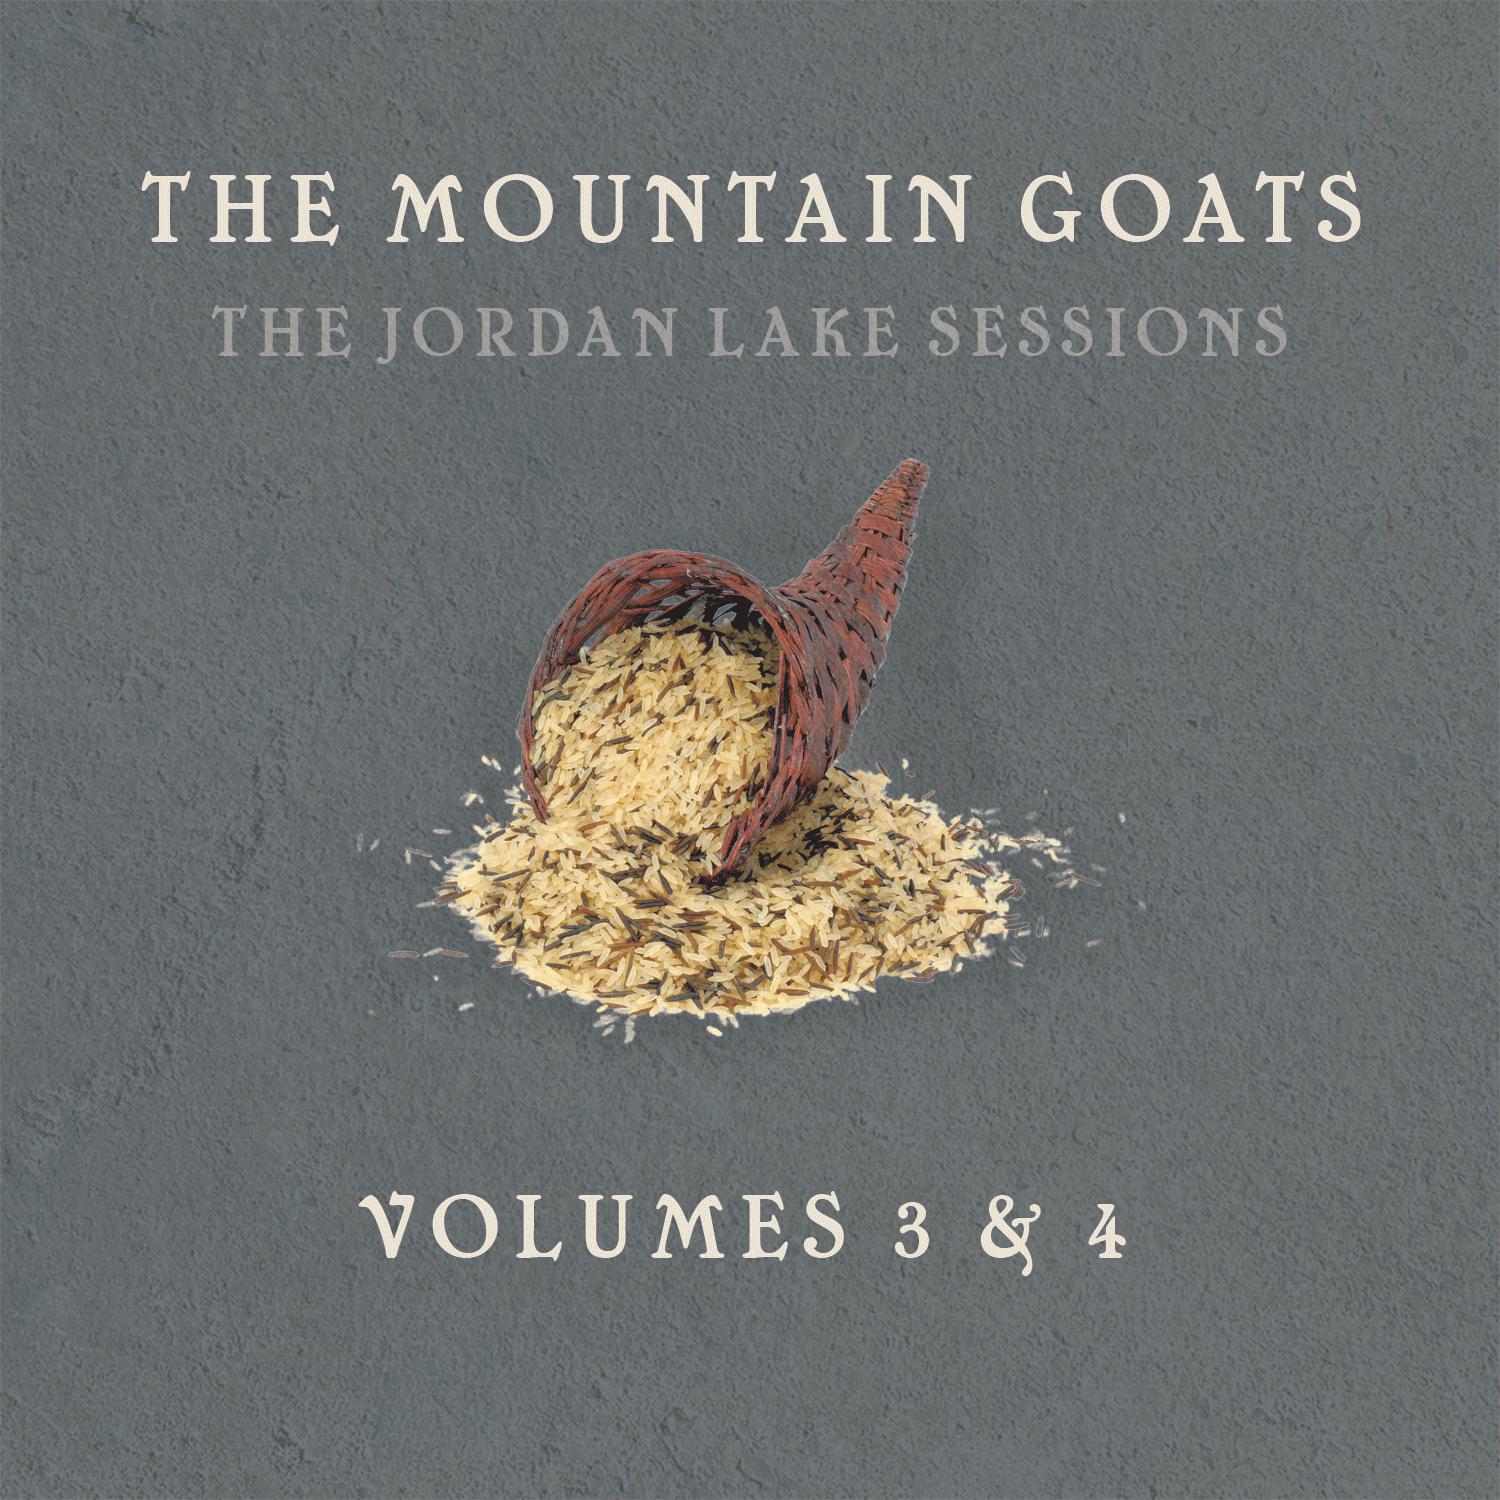 The Mountain Goats - Never Quite Free (The Jordan Lake Sessions Volume 4)